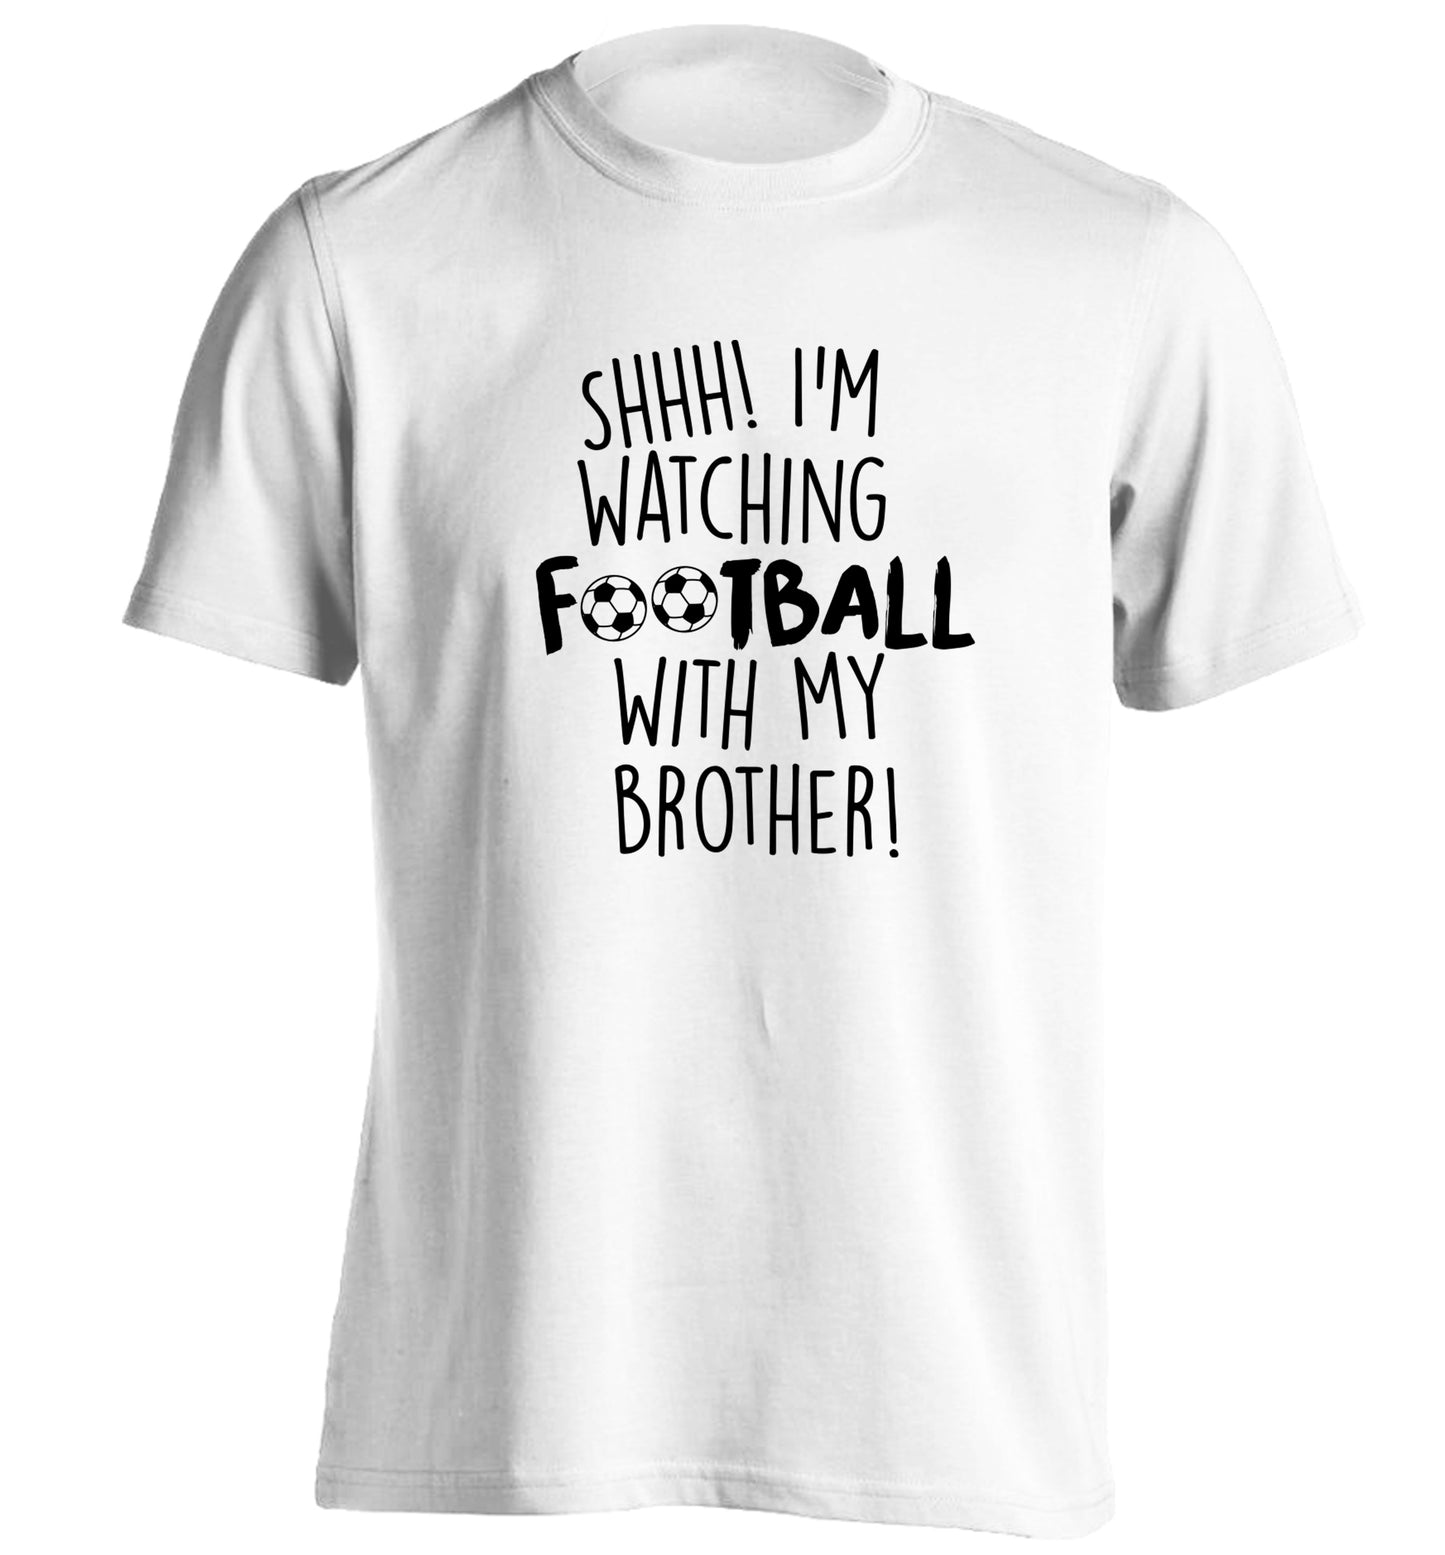 Shhh I'm watching football with my brother adults unisexwhite Tshirt 2XL